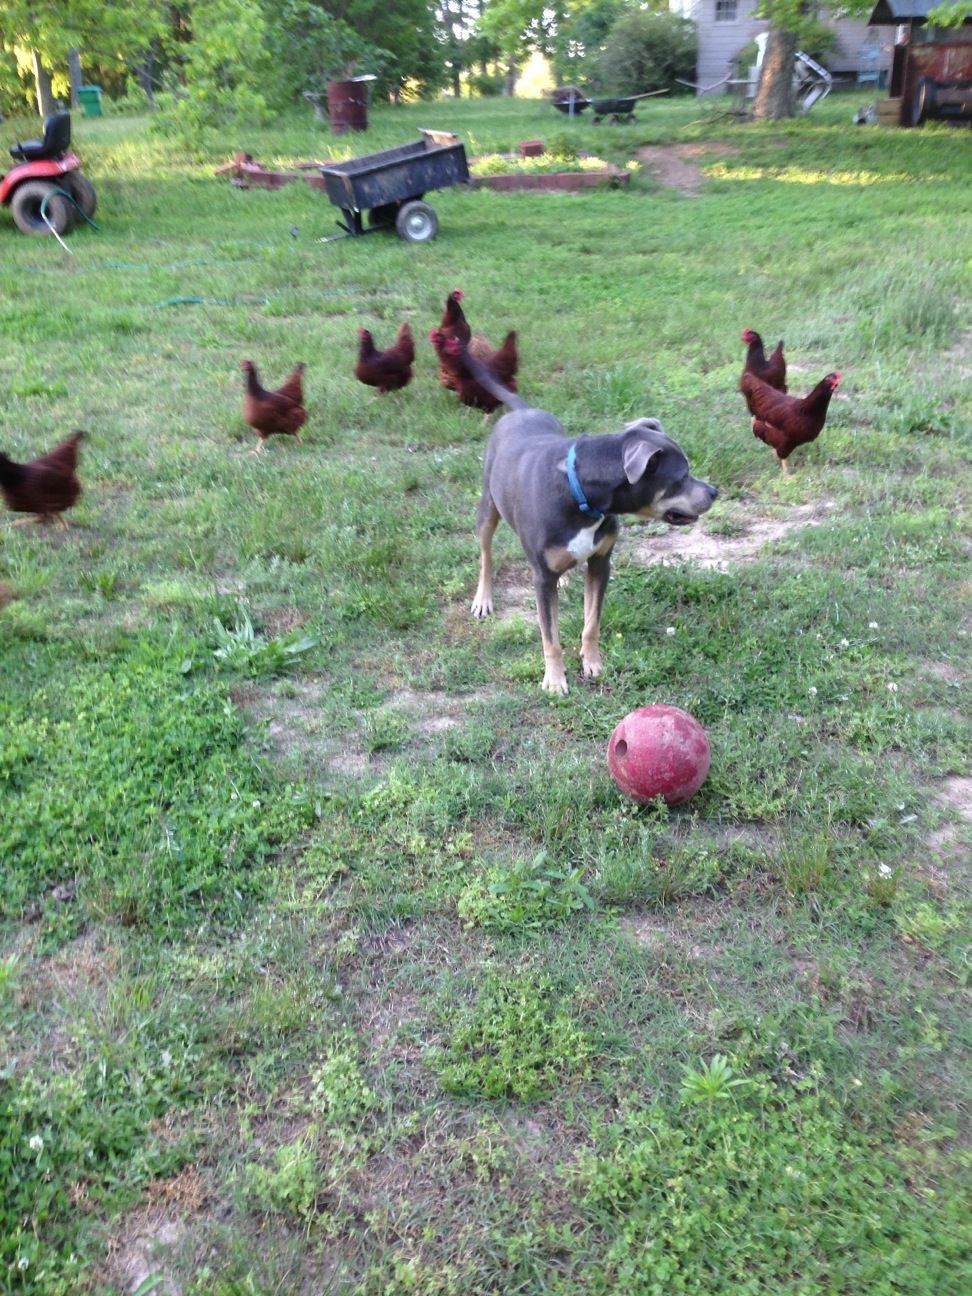 Being chaced down by chickens